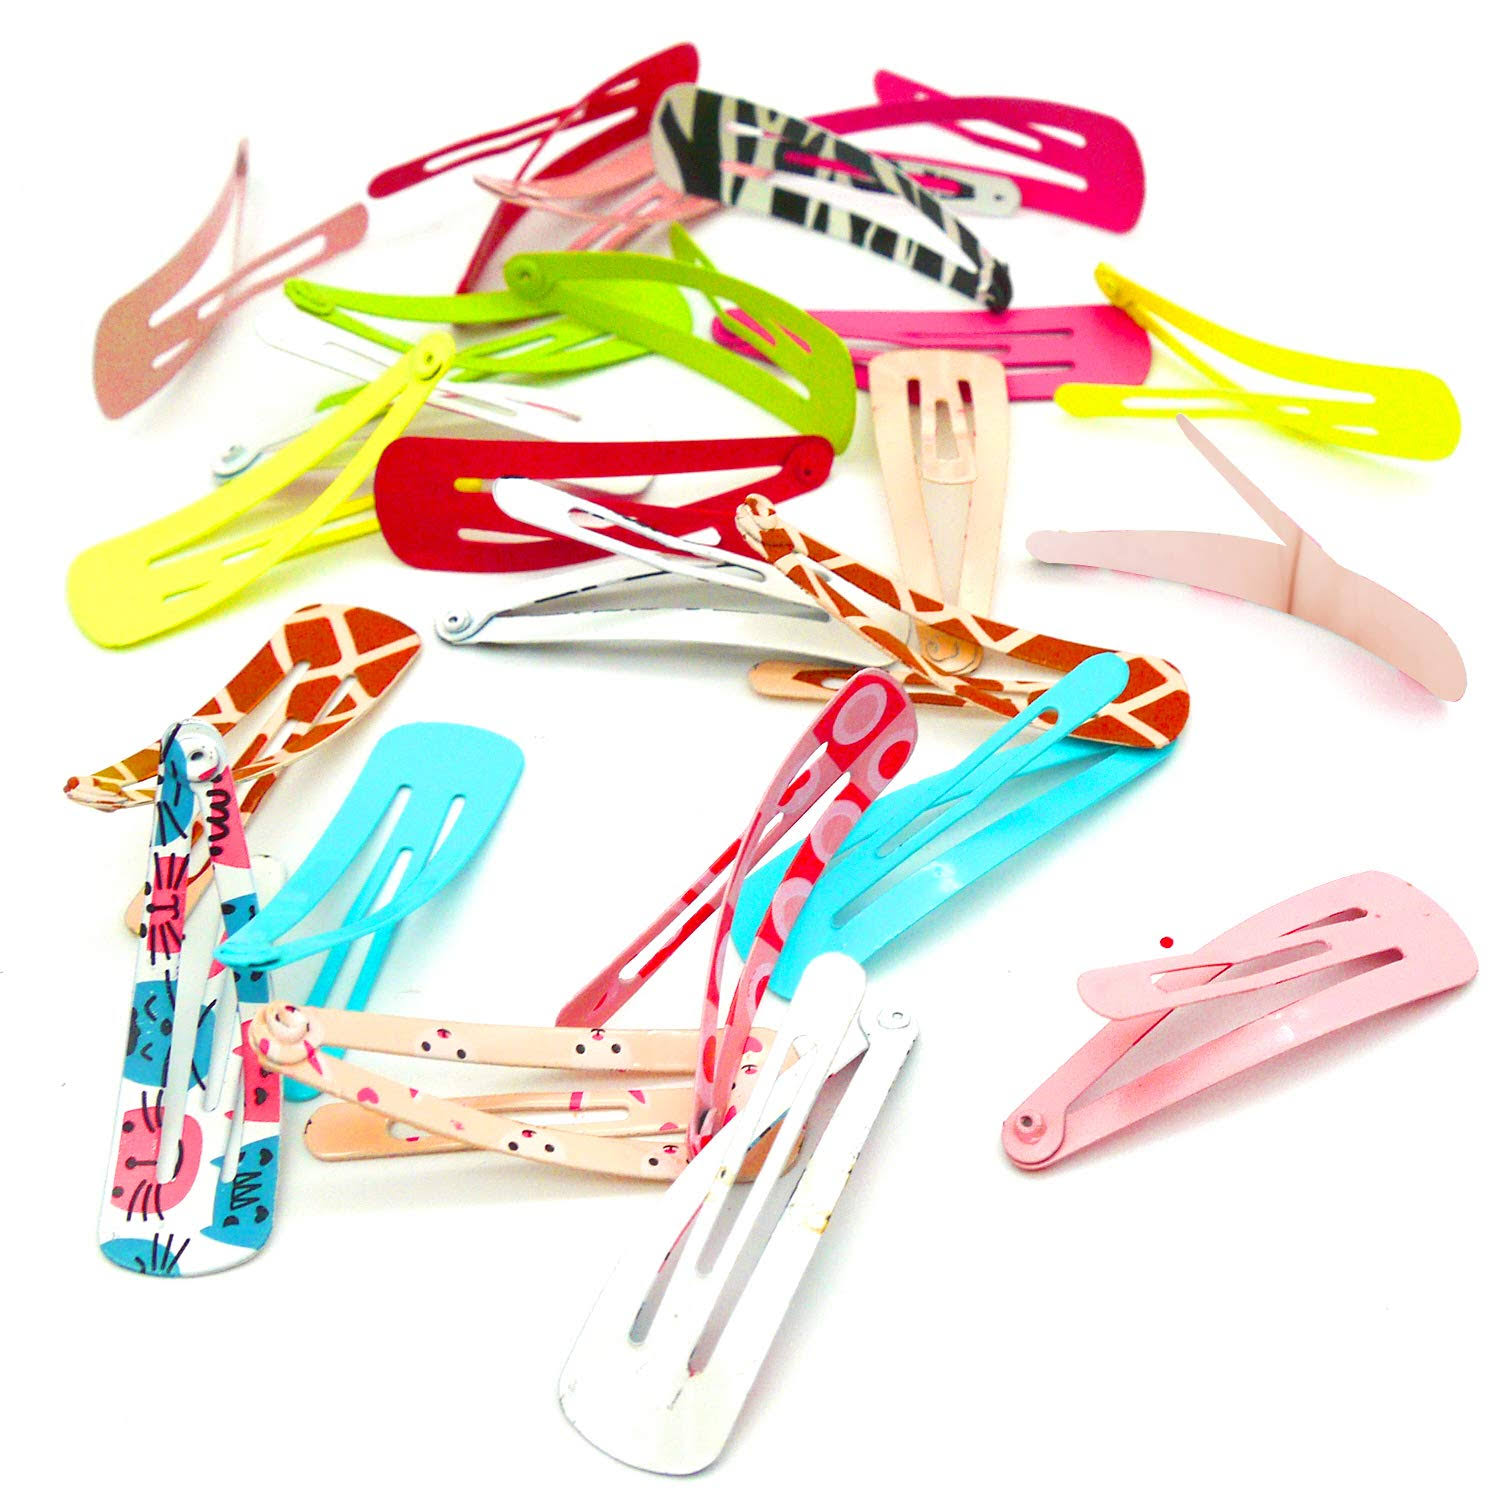 24pk Snap Clips For Girls | High Quality Hair Clips in 12 Different Colours and Designs | Great Gift Idea For Children’s Parties, School Activities